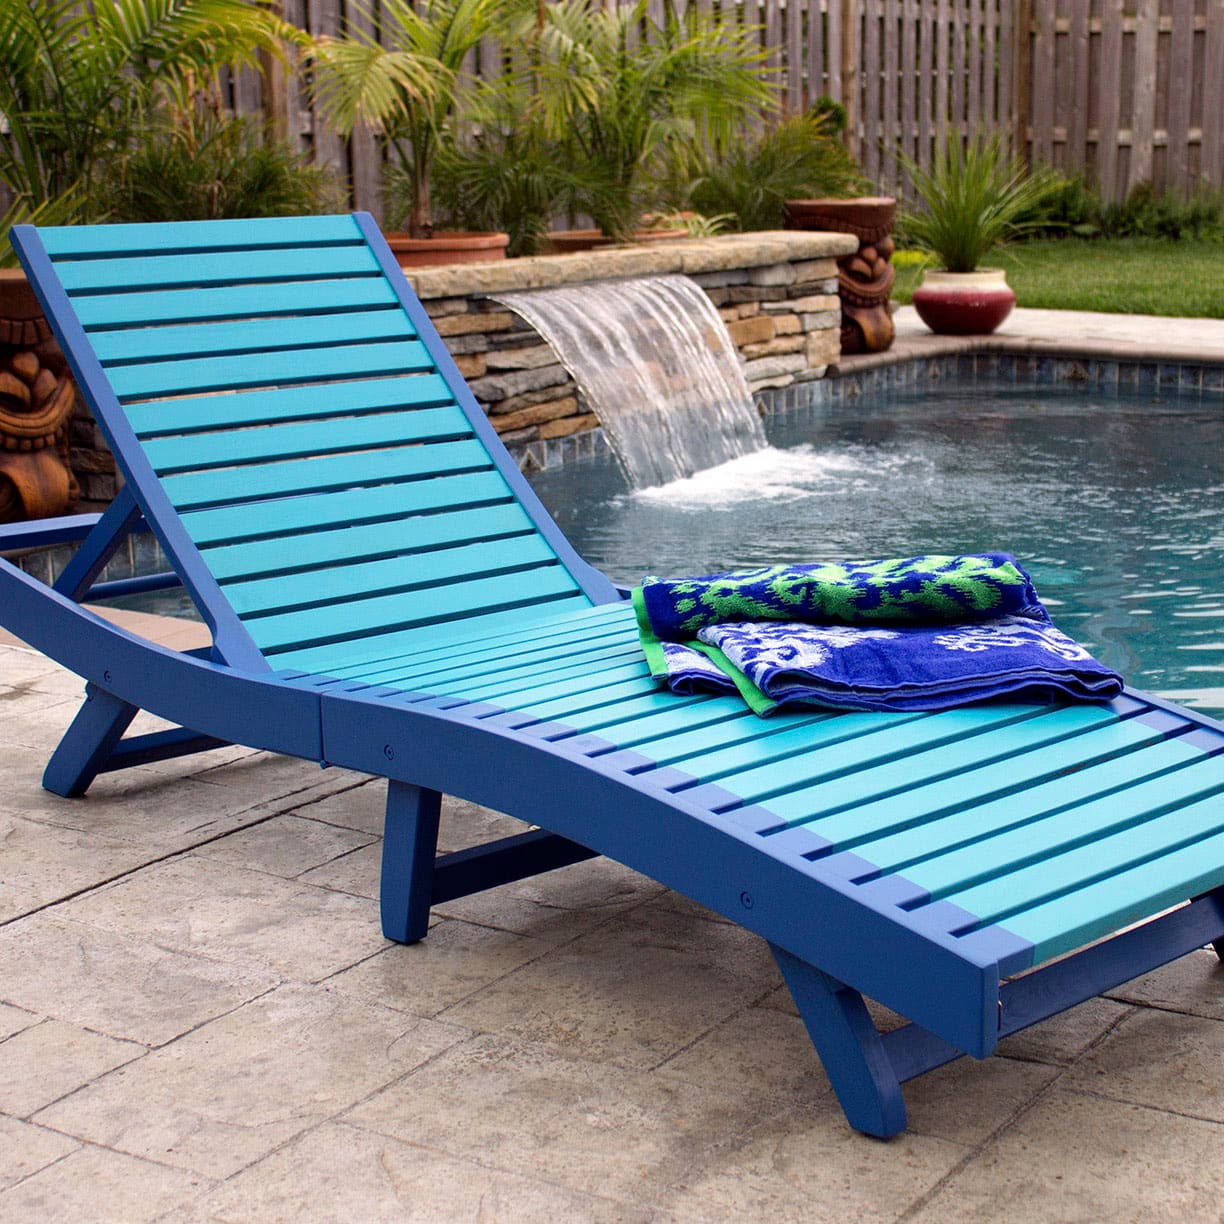 Best Outdoor Chaise Lounge For Seniors / Senior Chaise Lounge C-151